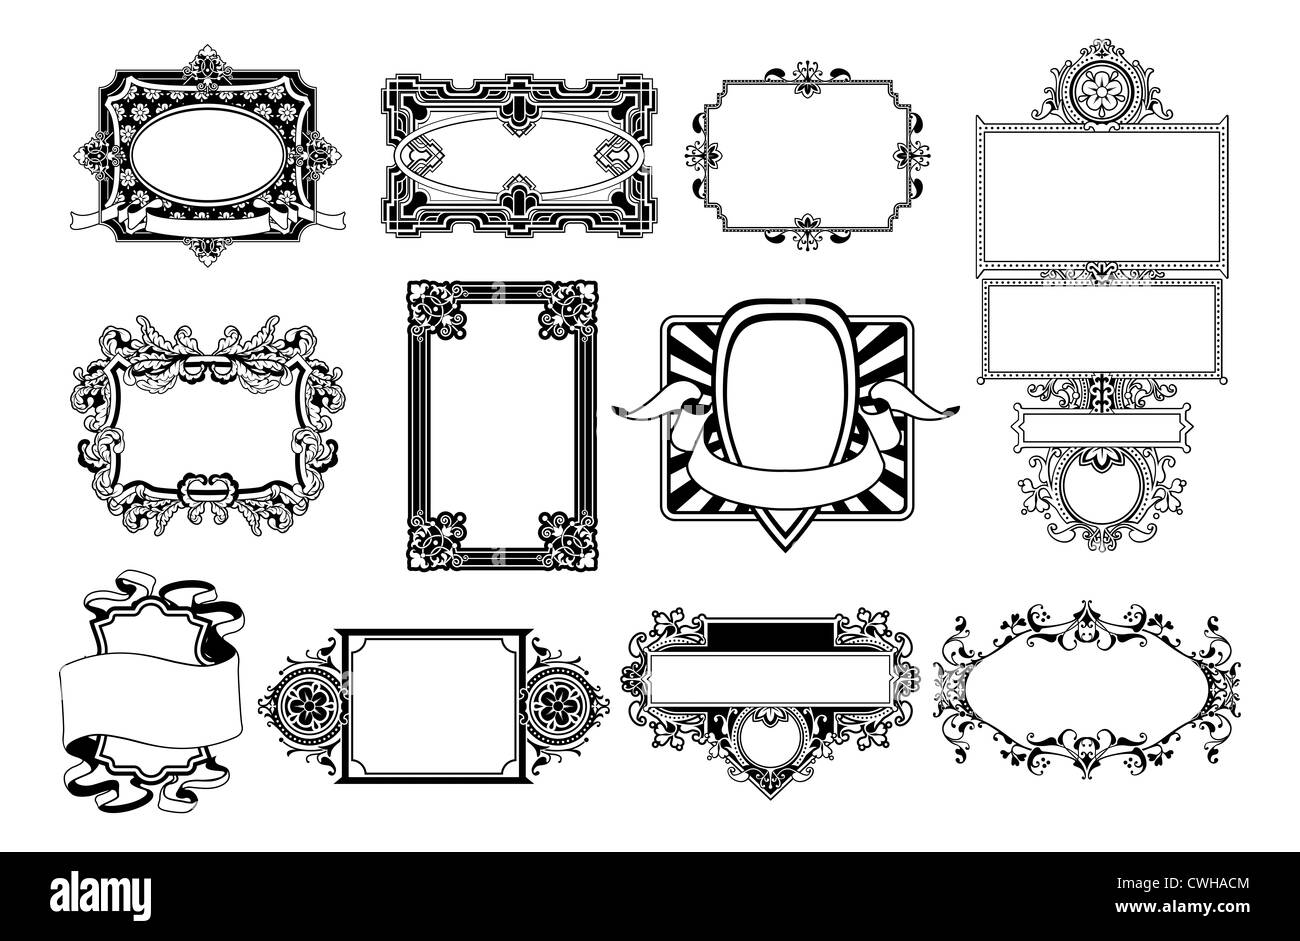 A set of ornate frame and border design elements Stock Photo